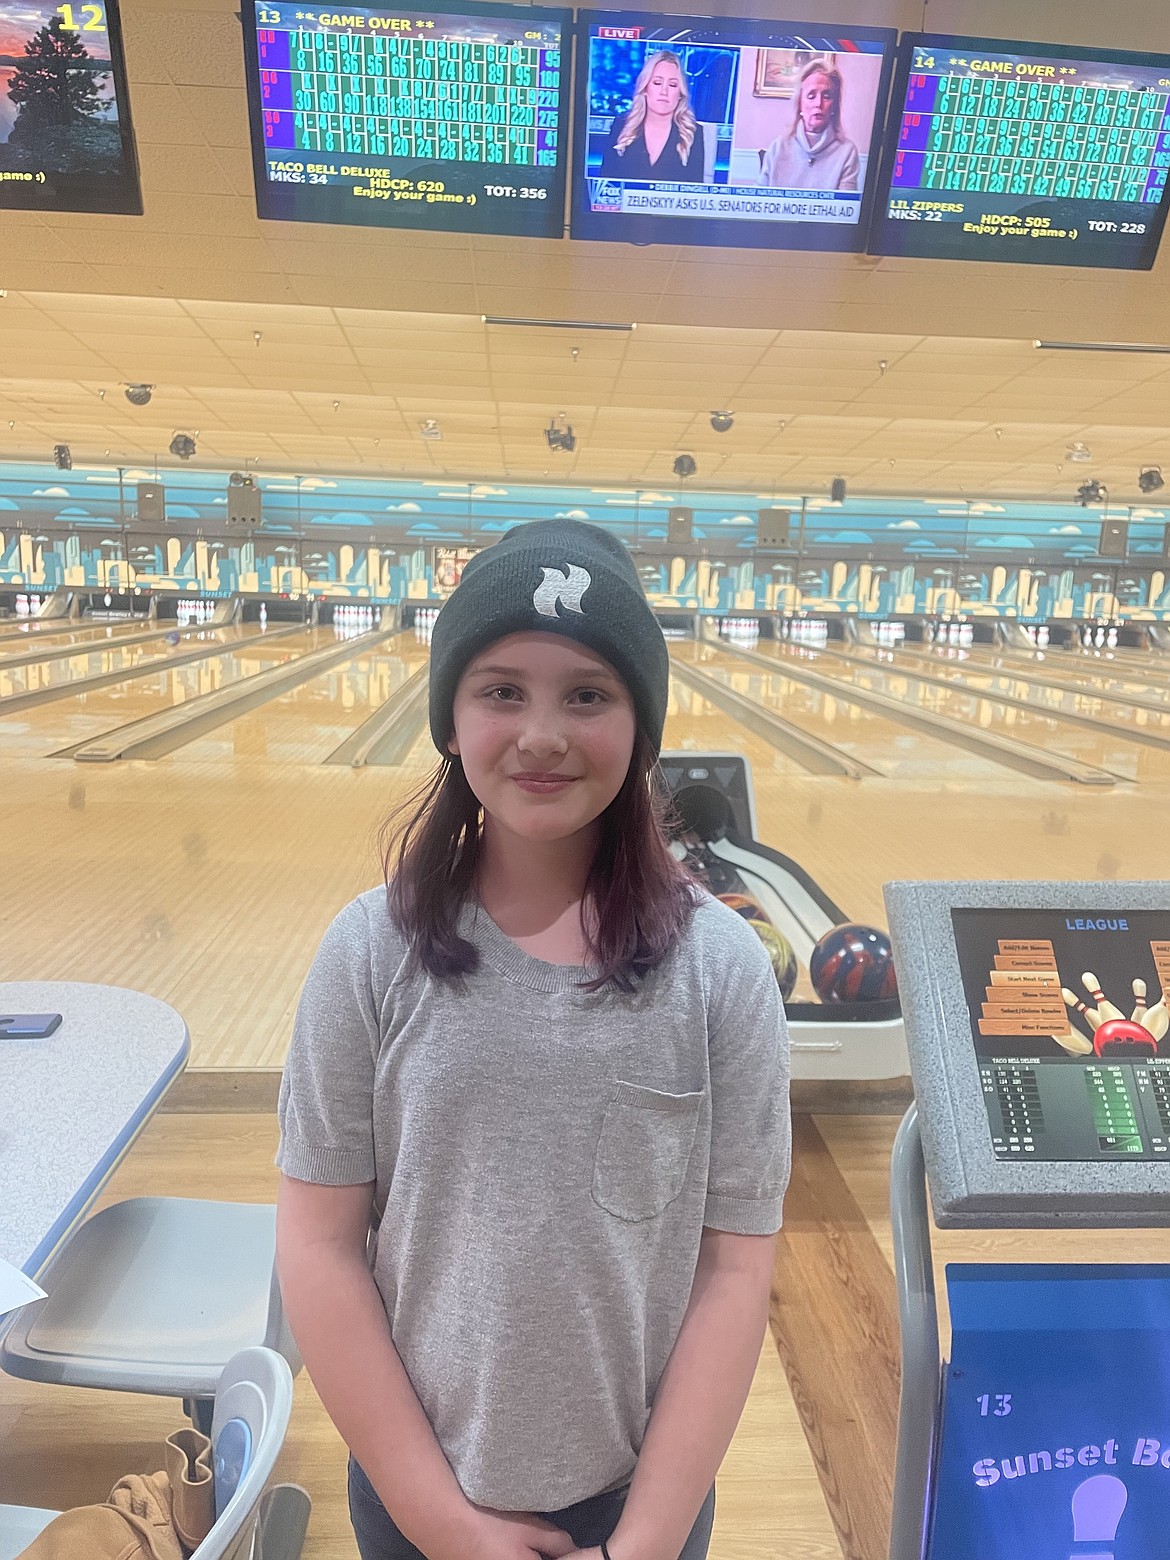 Courtesy photo
Rosy Gallegos, 9, rolled a 220 game in the Preps division at Sunset Bowling Center recently.